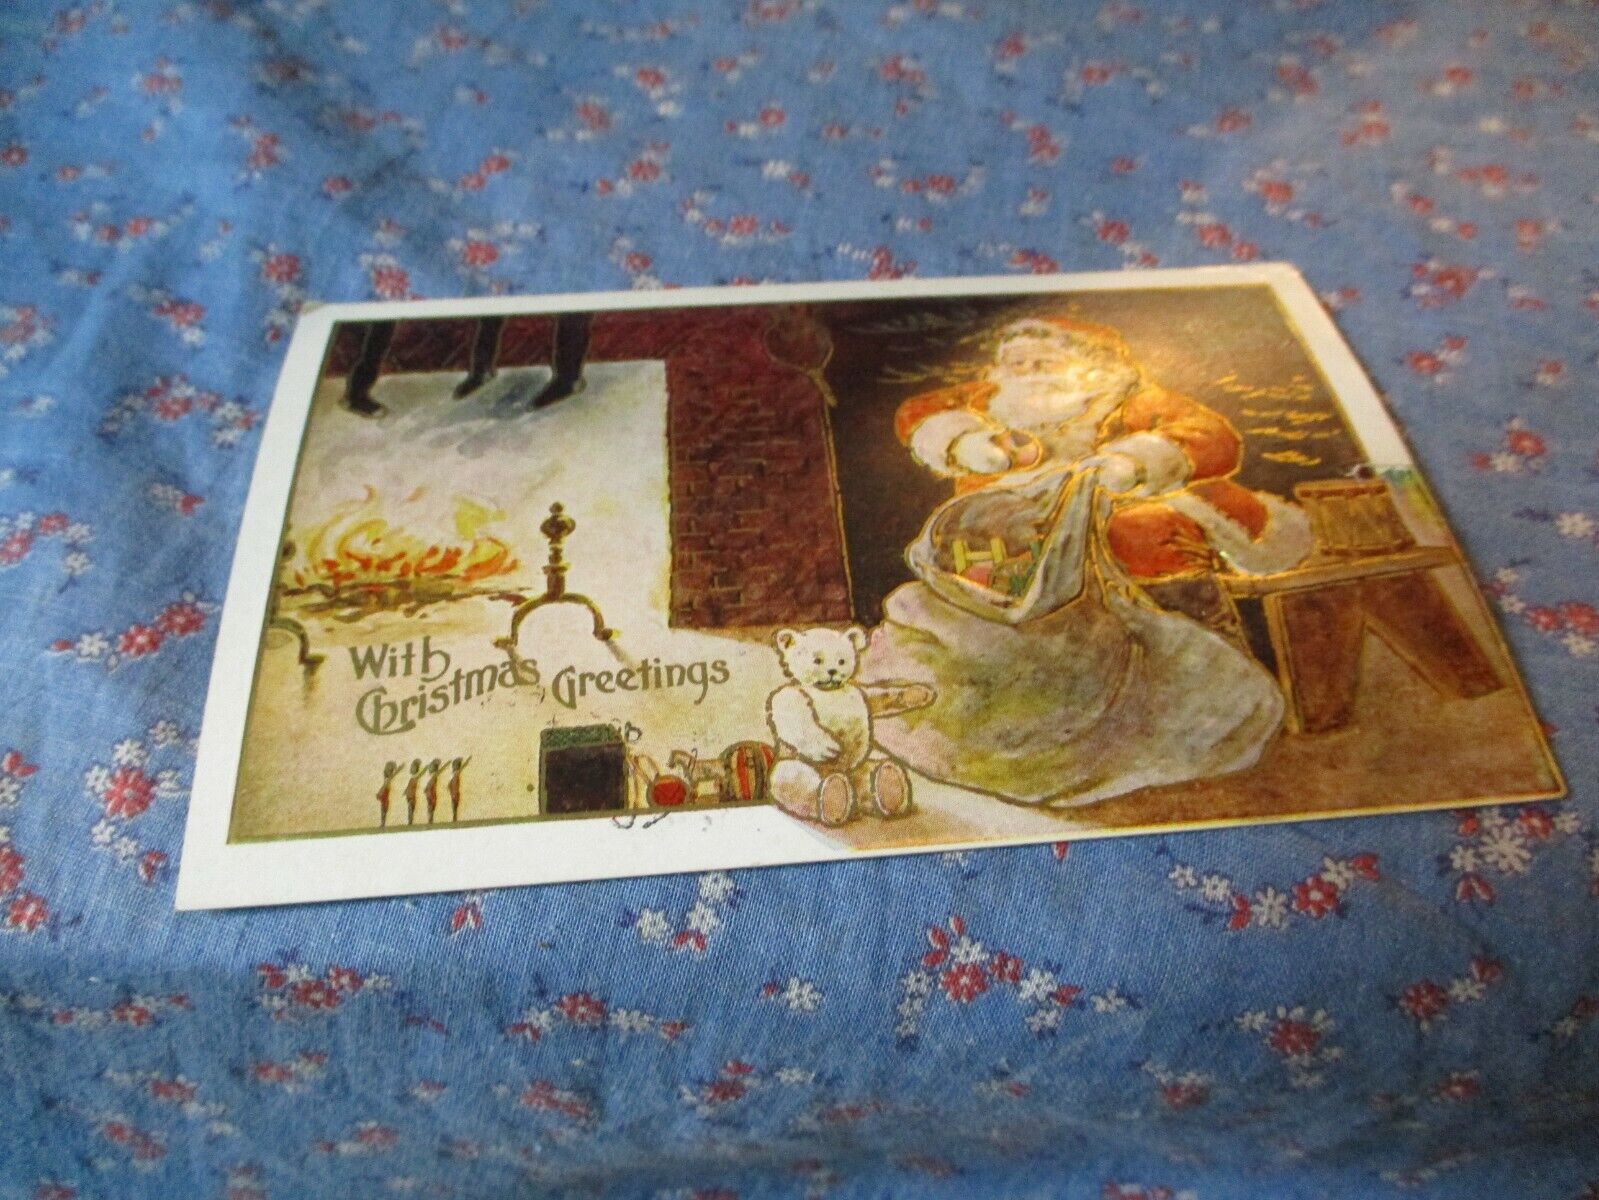 Old Postcard 1909 Madison Wis With Christmas Greetings Santa Claus by Fire Toys